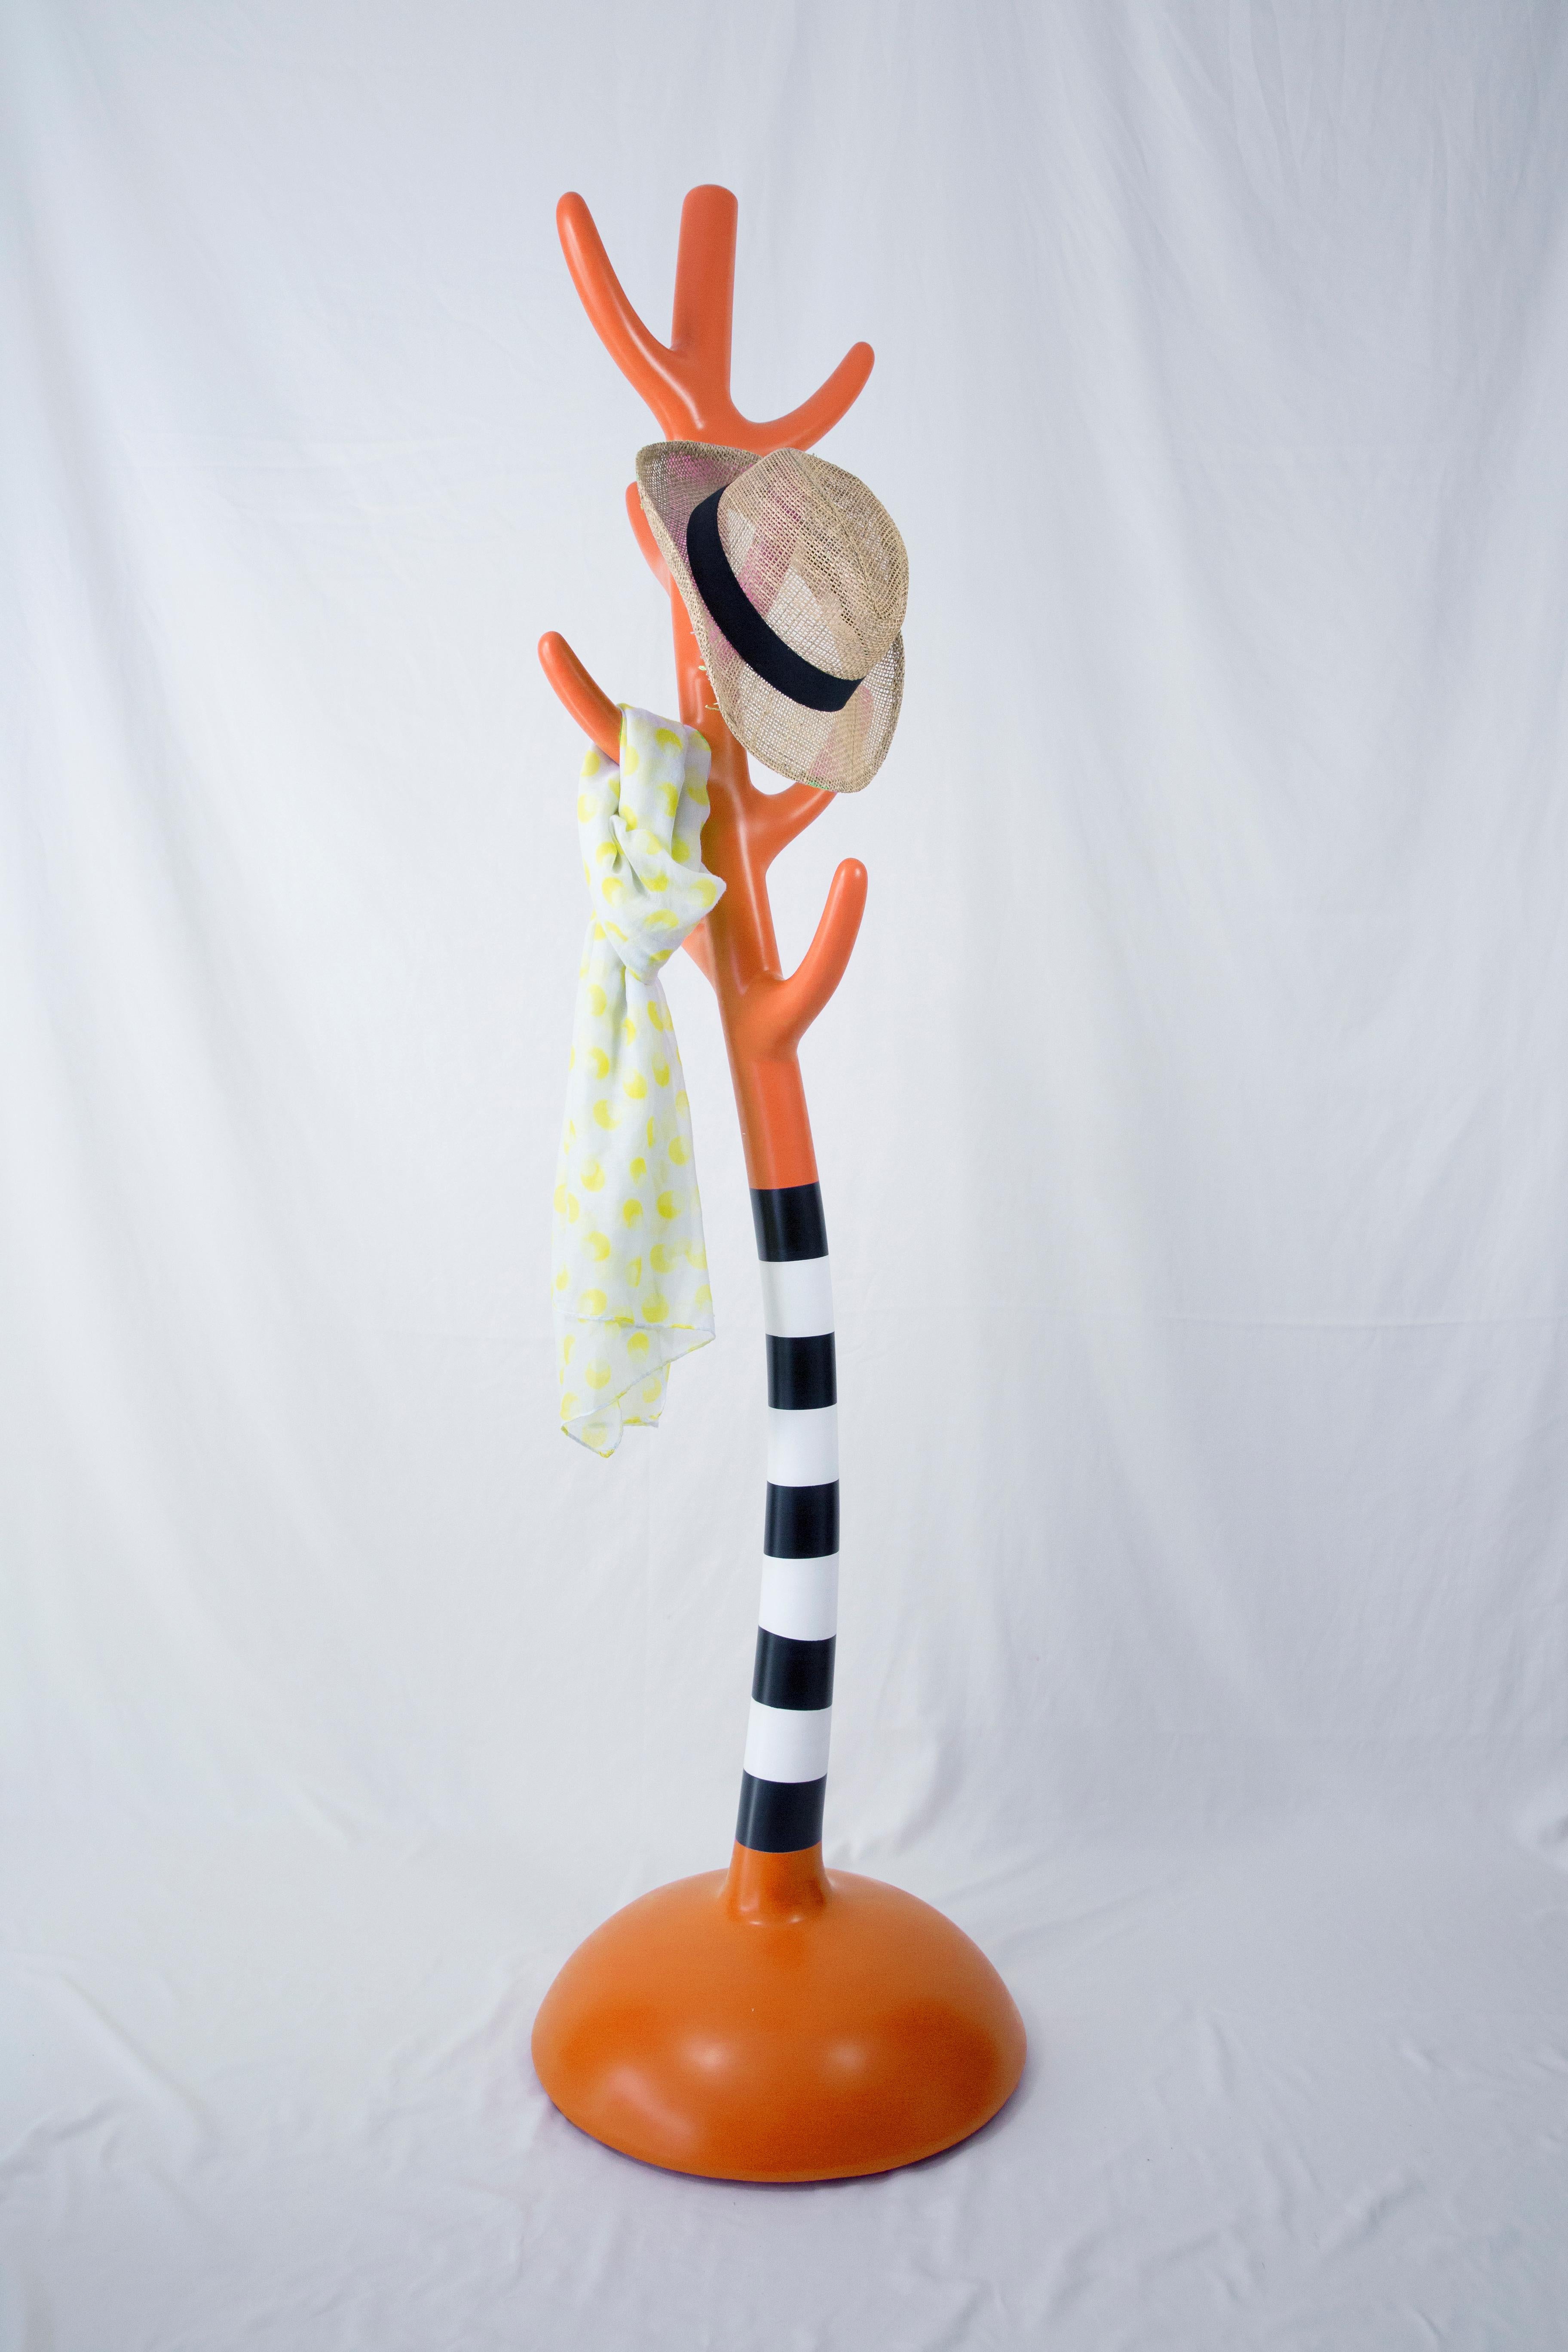 Crooked Coat Rack: Artistic Orange Sculptural Hanger In New Condition For Sale In Istanbul, Maltepe